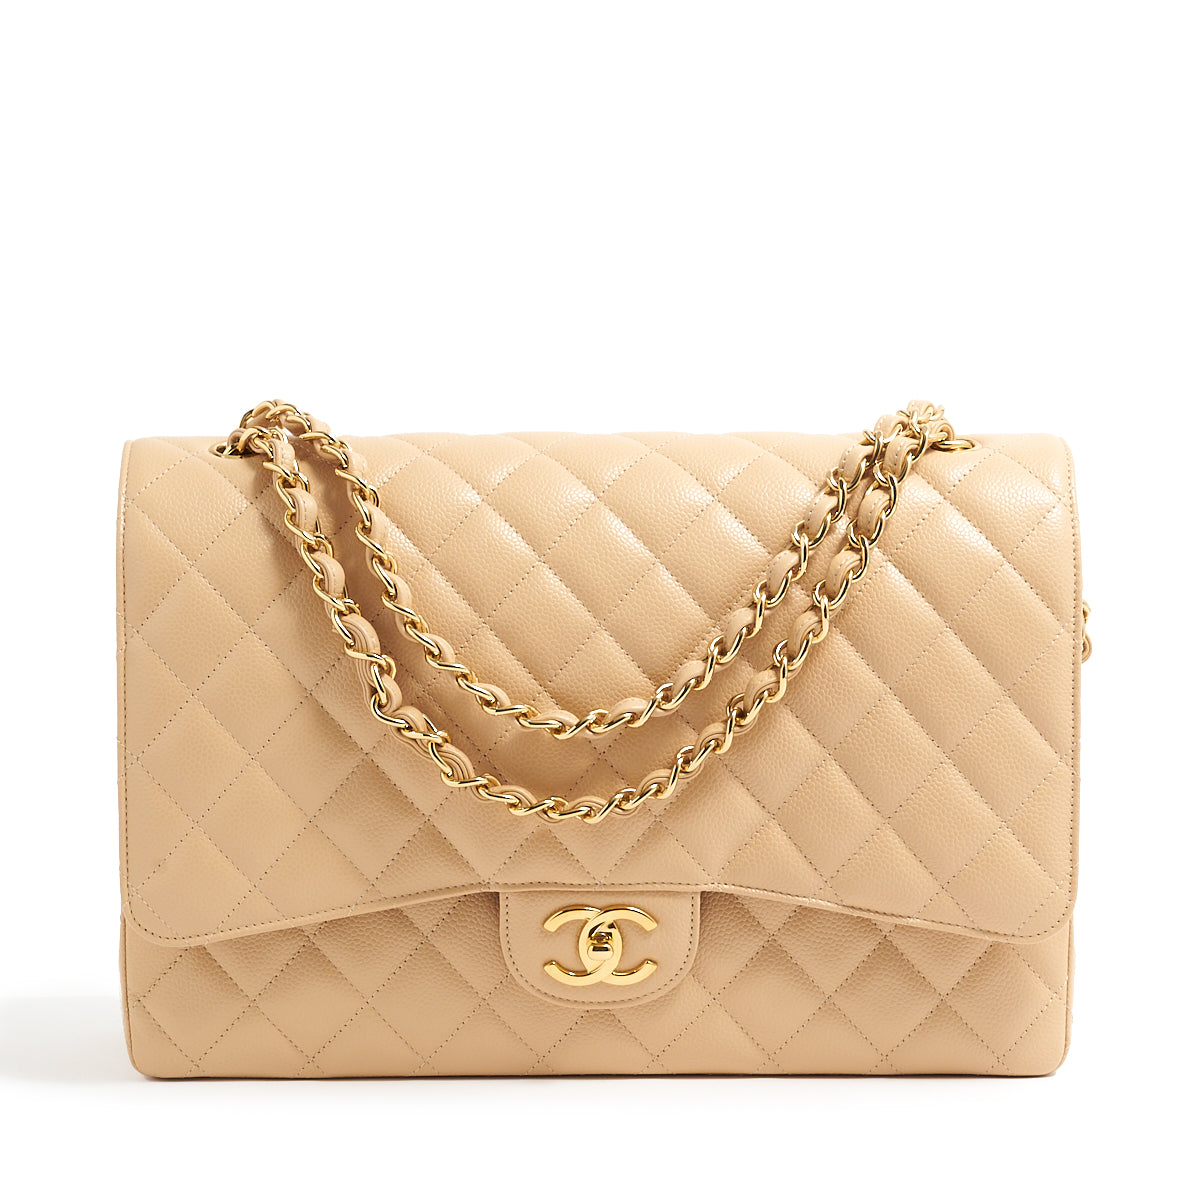 How To Save On Designer Bags in Europe  CHANEL Shopping Tips  Katies  Bliss